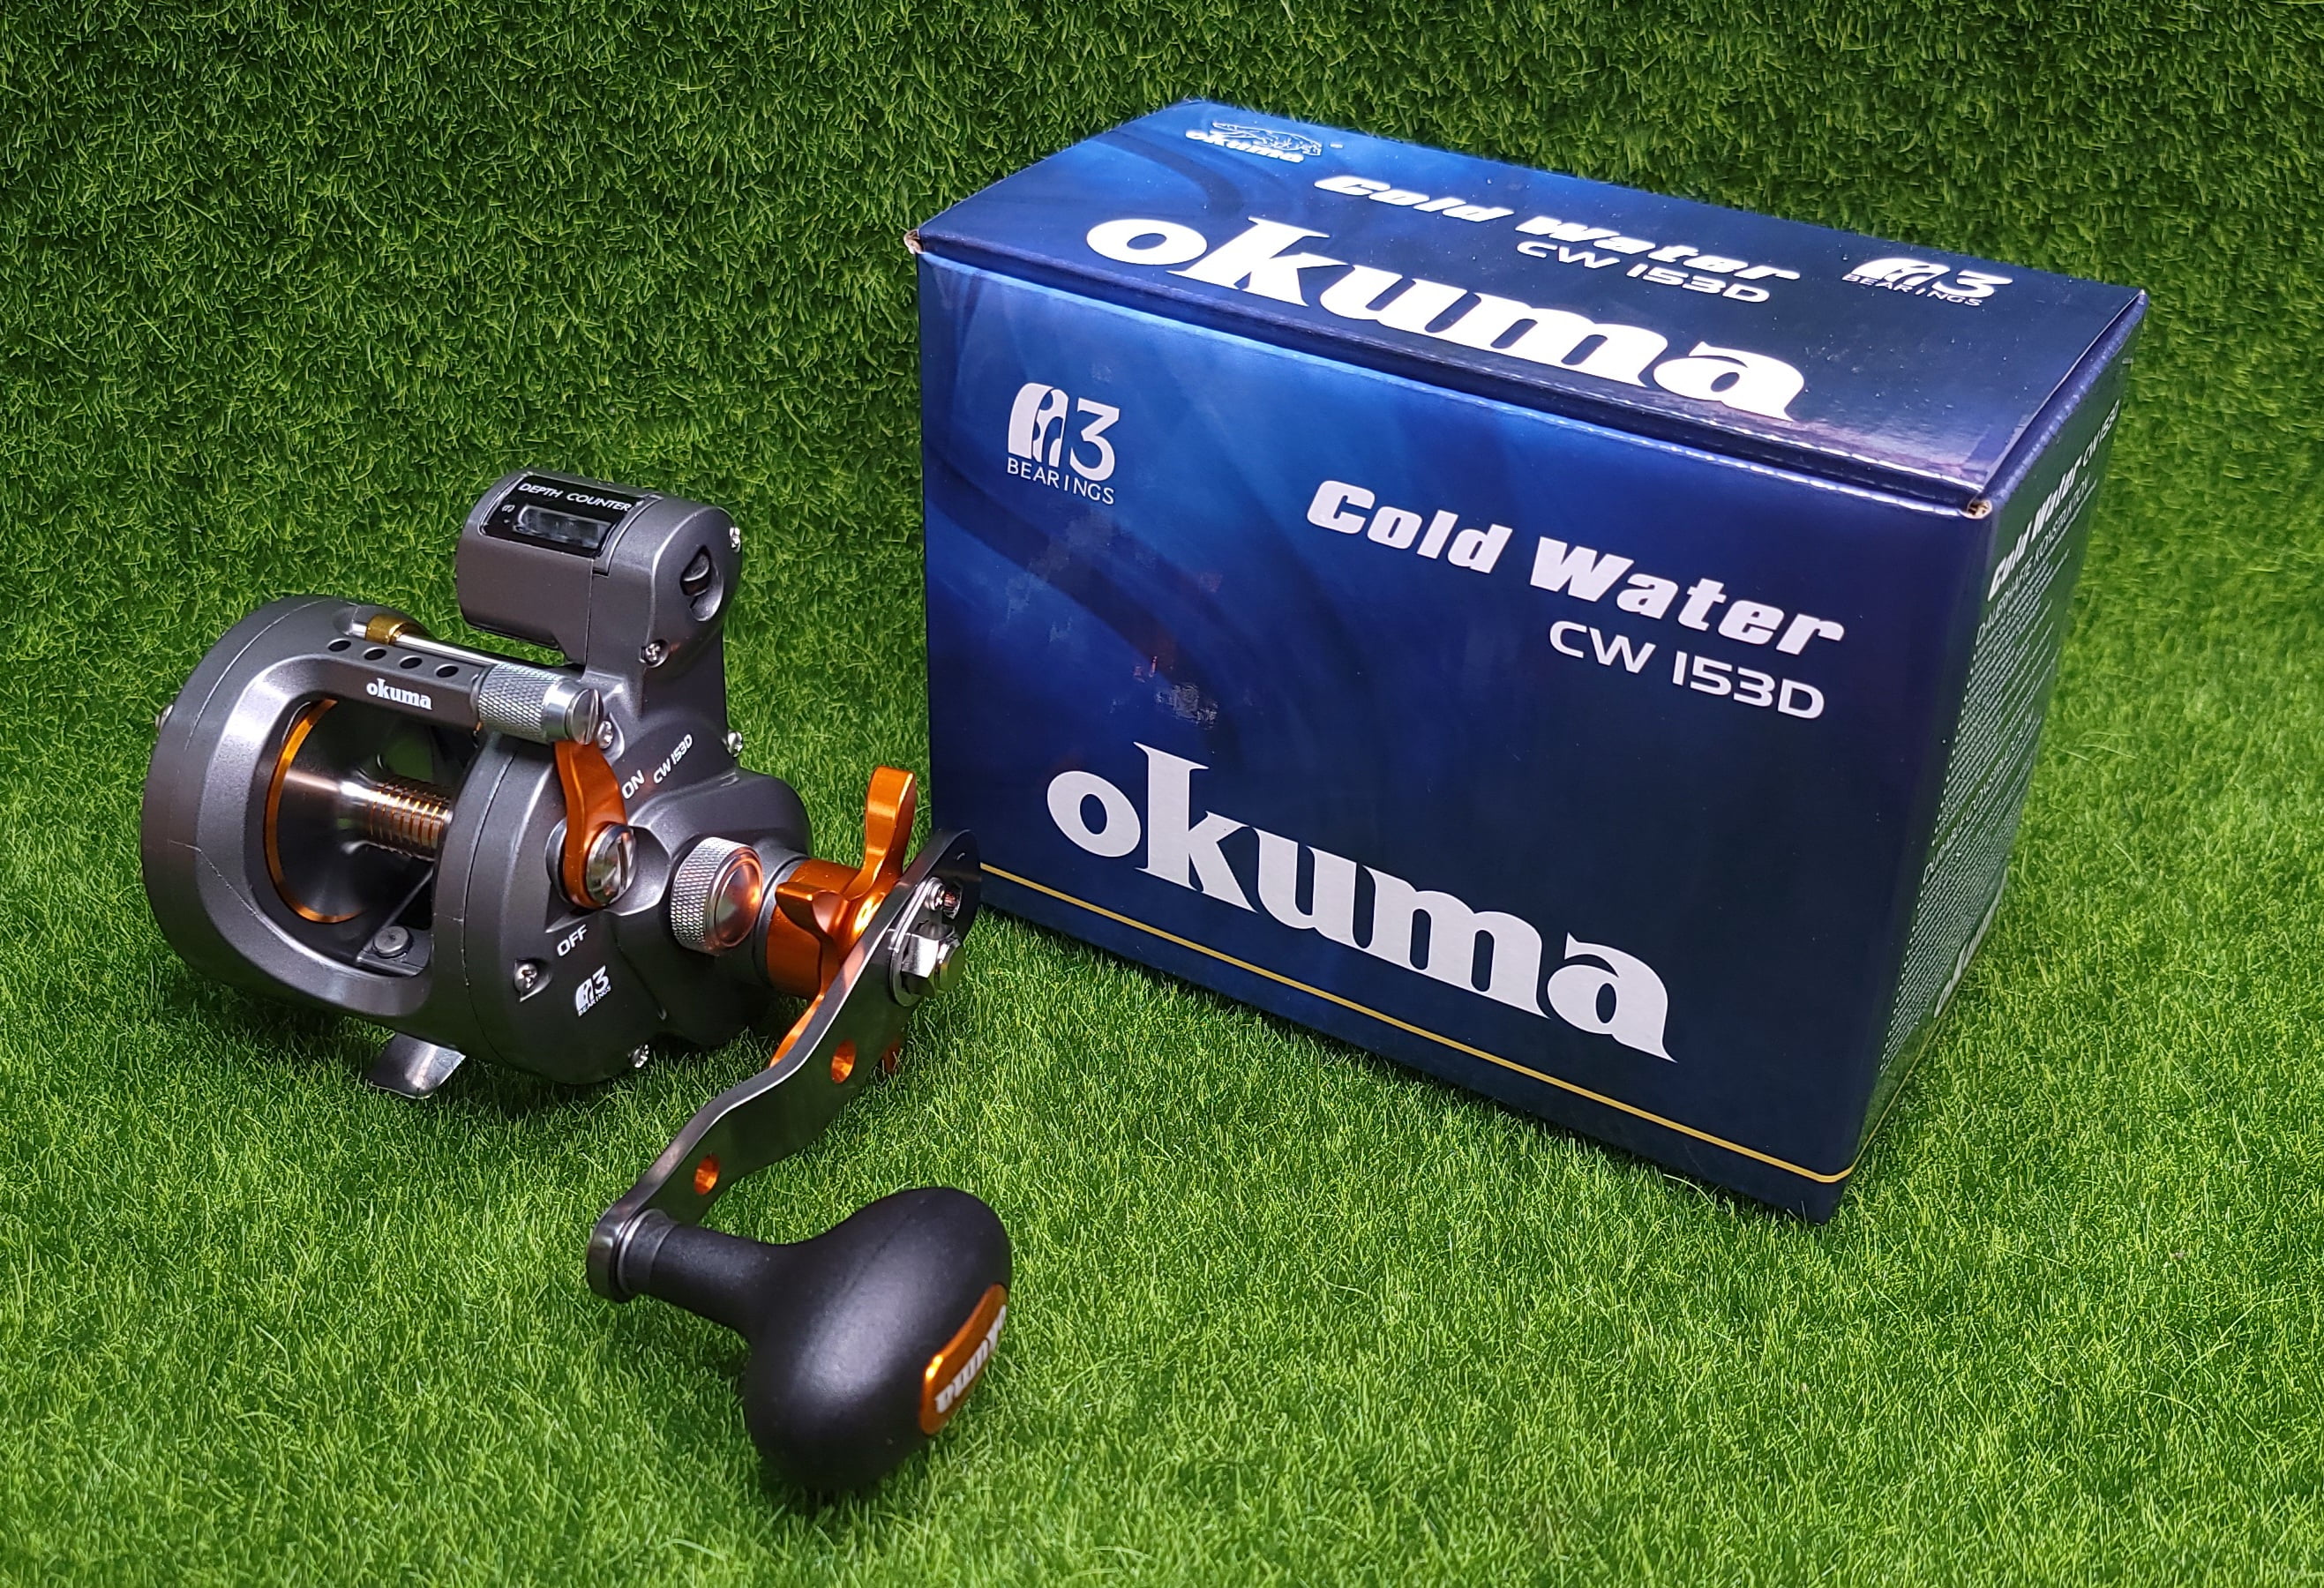 Okuma Cold Water Line Counter 5.1:1 Conventional Reel, Right Hand - CW-153D